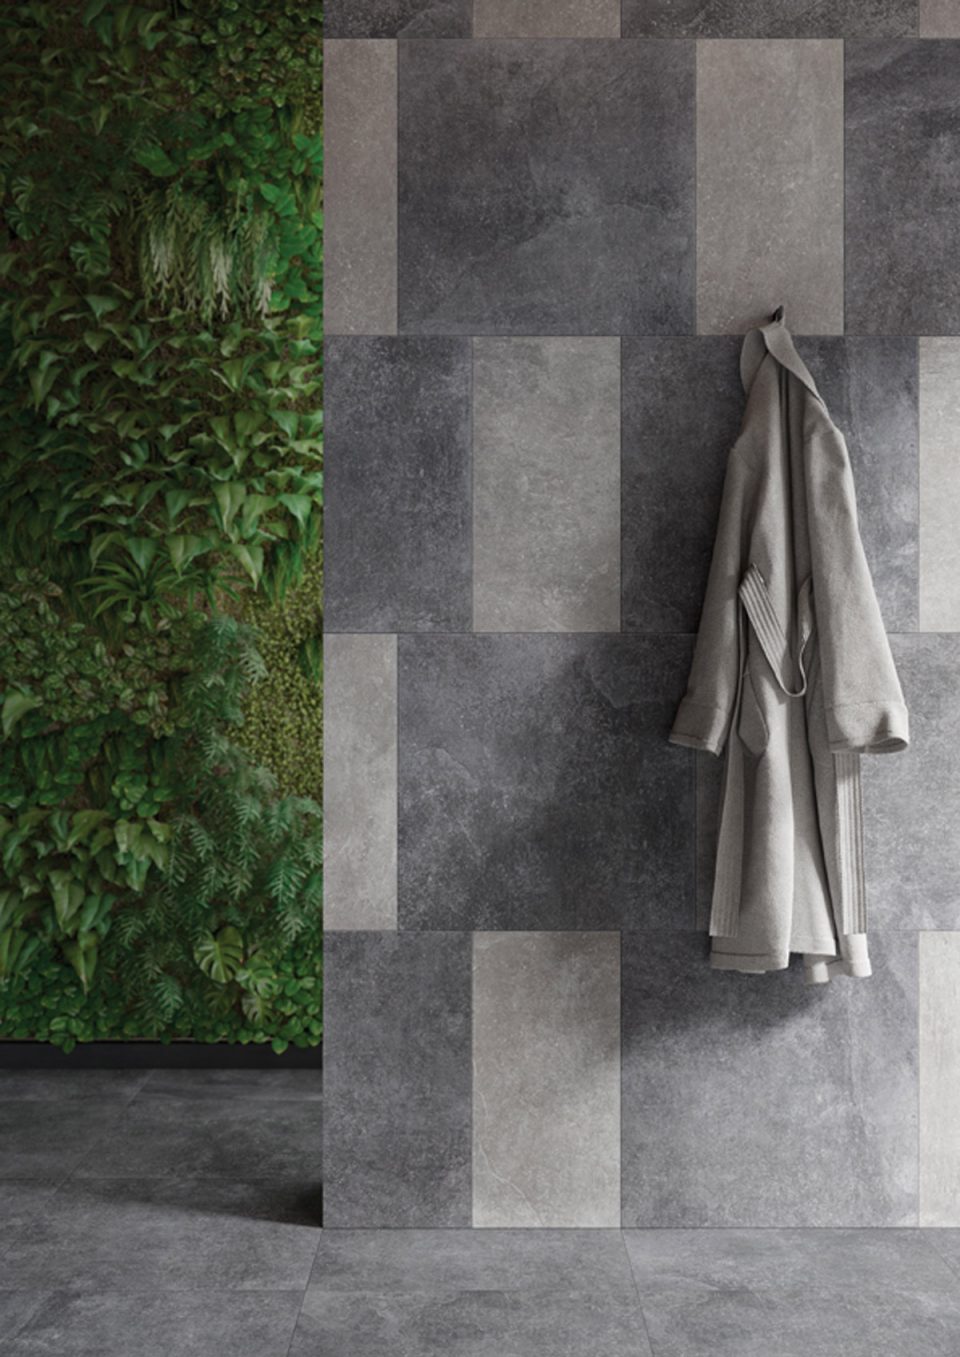 The Fashion Stone collection makes a powerful statement with its sheer simplicity. Packed full of sass and contemporary style, this is the ideal tile choice for creating a minimalist look and feel.